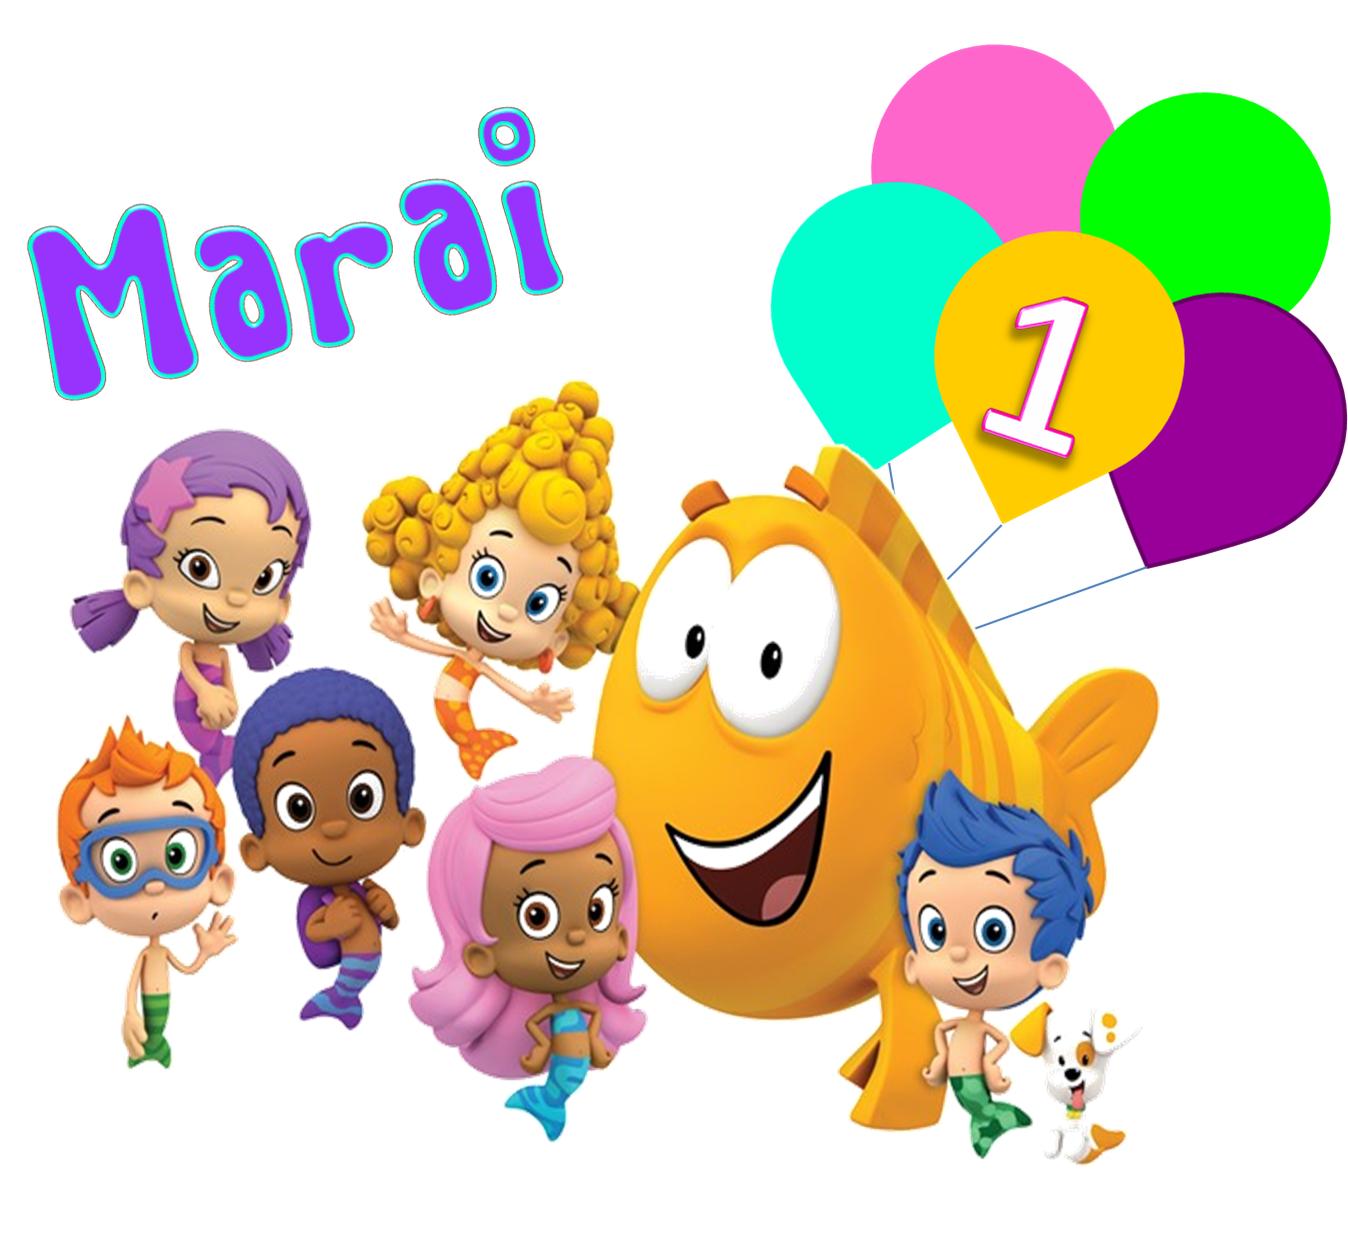 Download Bubble Guppies Clipart at GetDrawings.com | Free for ...